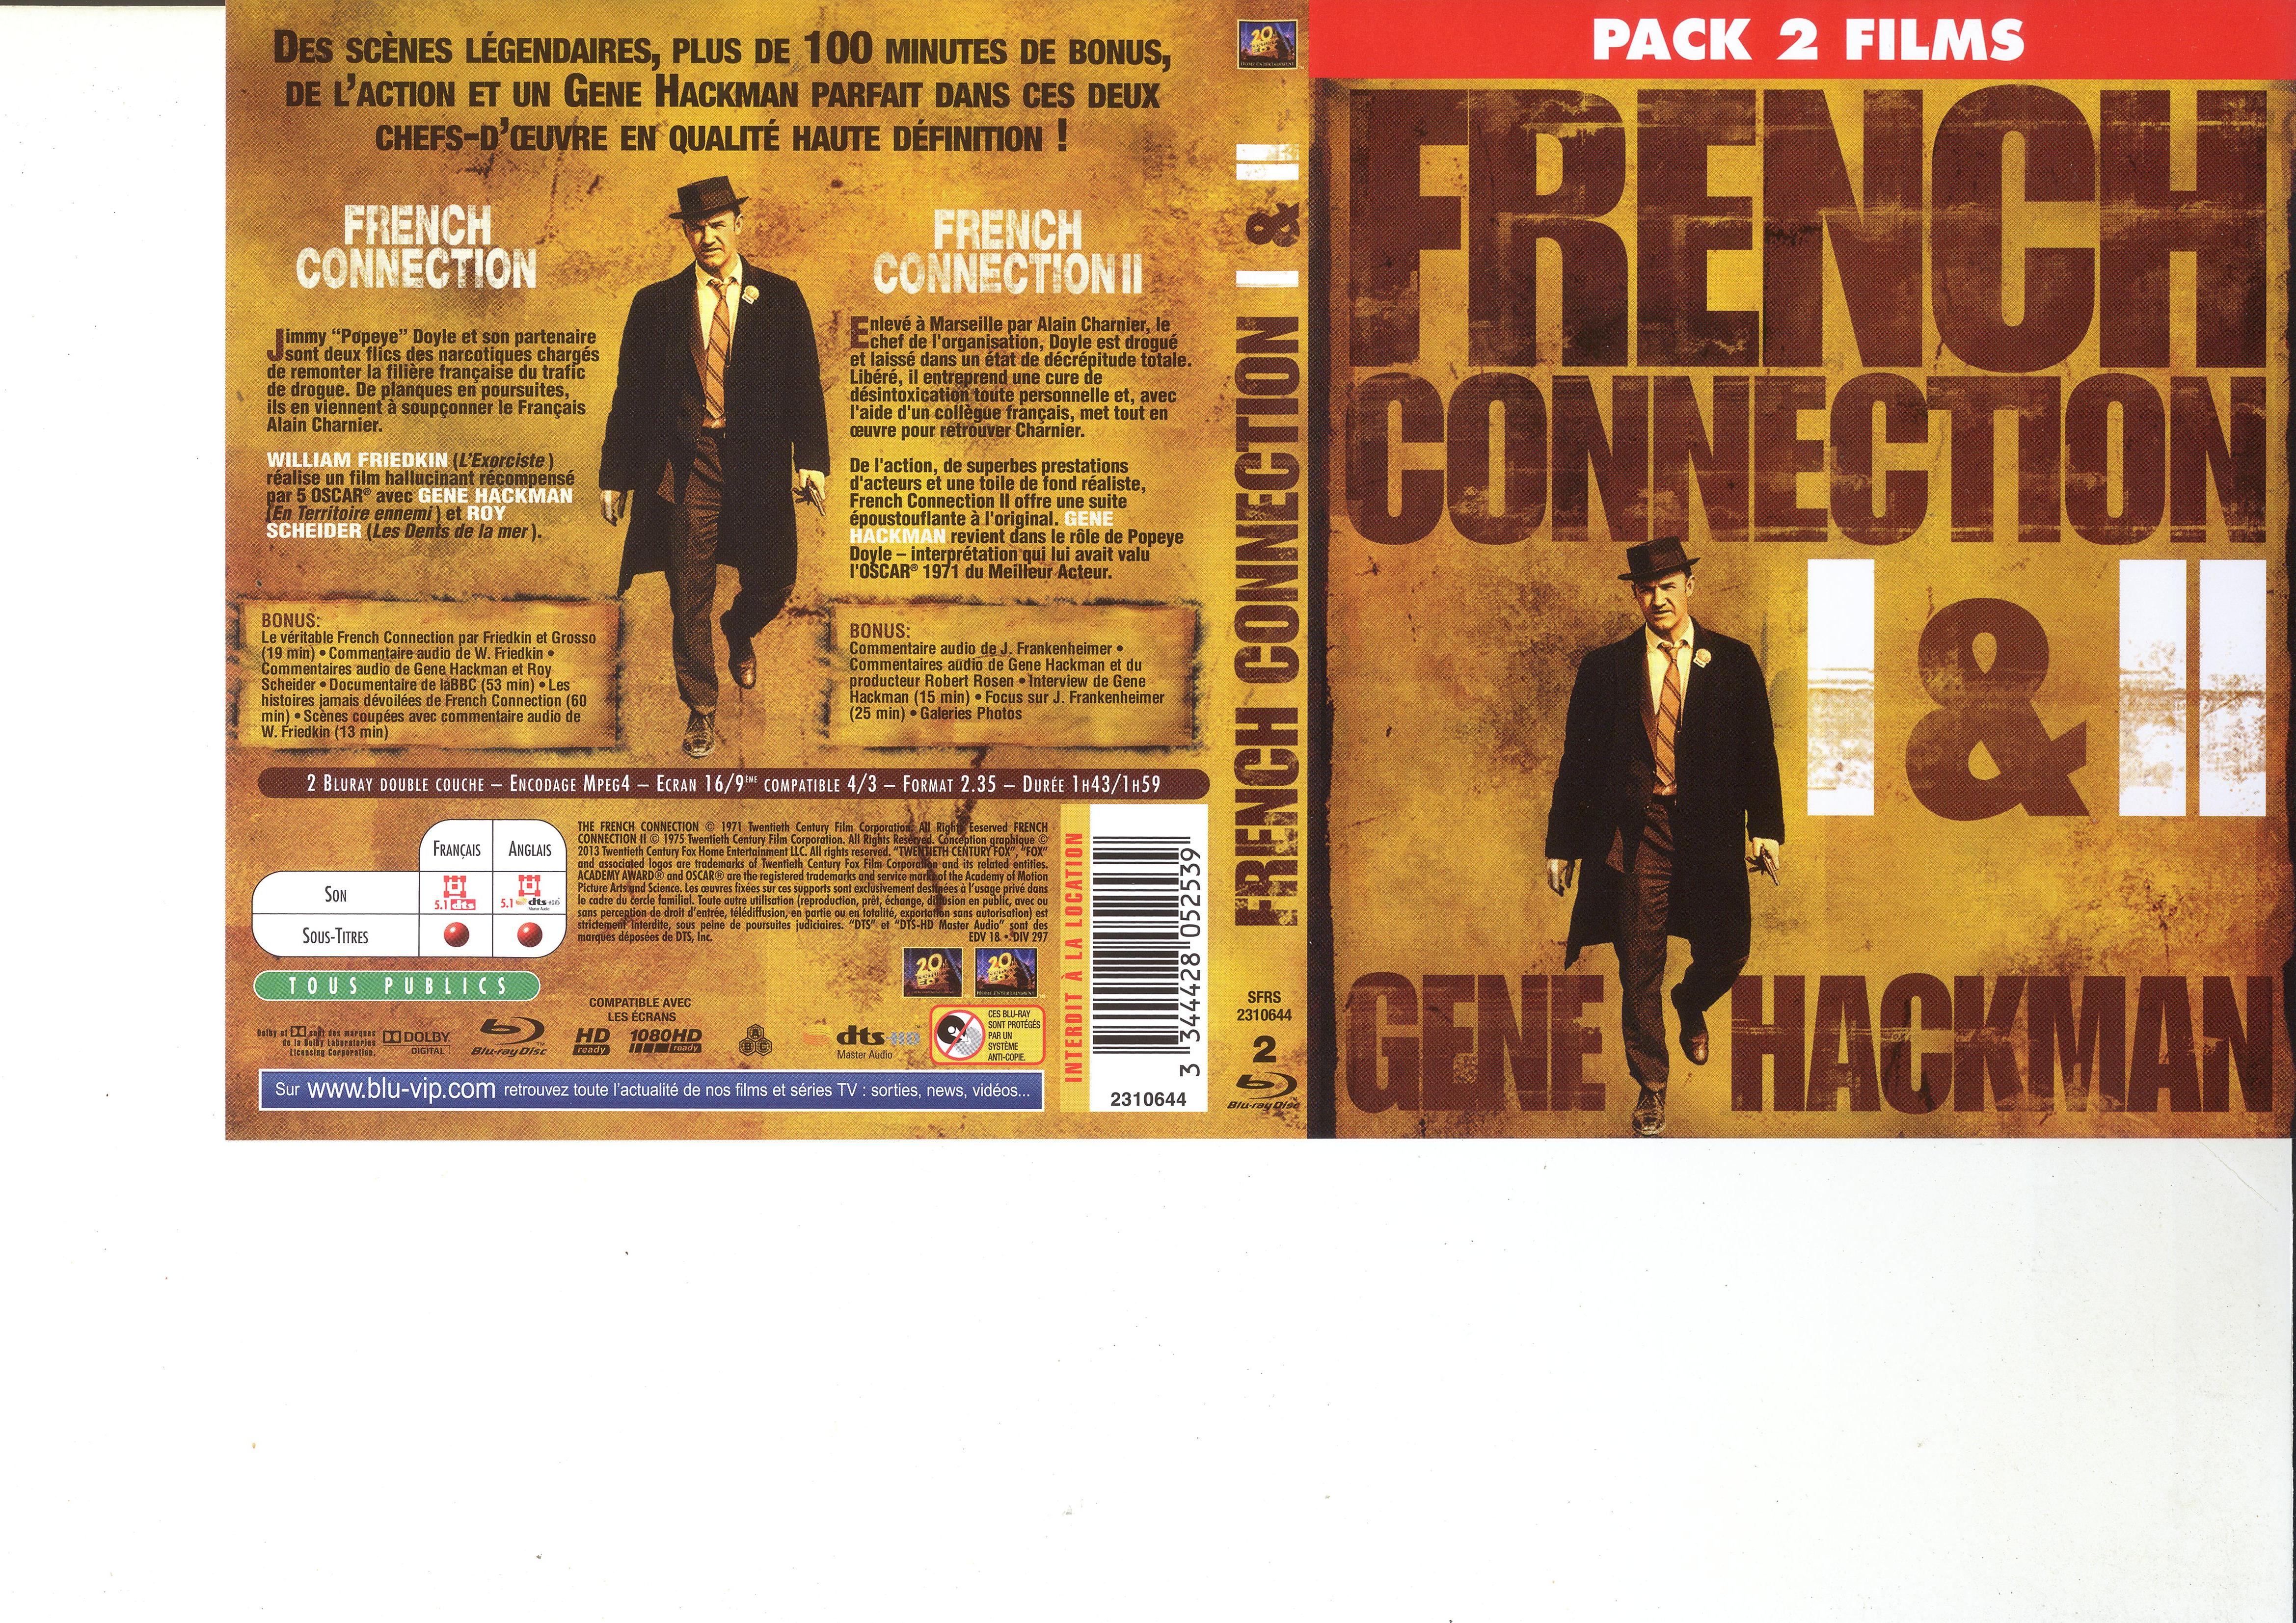 Jaquette DVD French connection 1 et 2 (BLU-RAY) v2